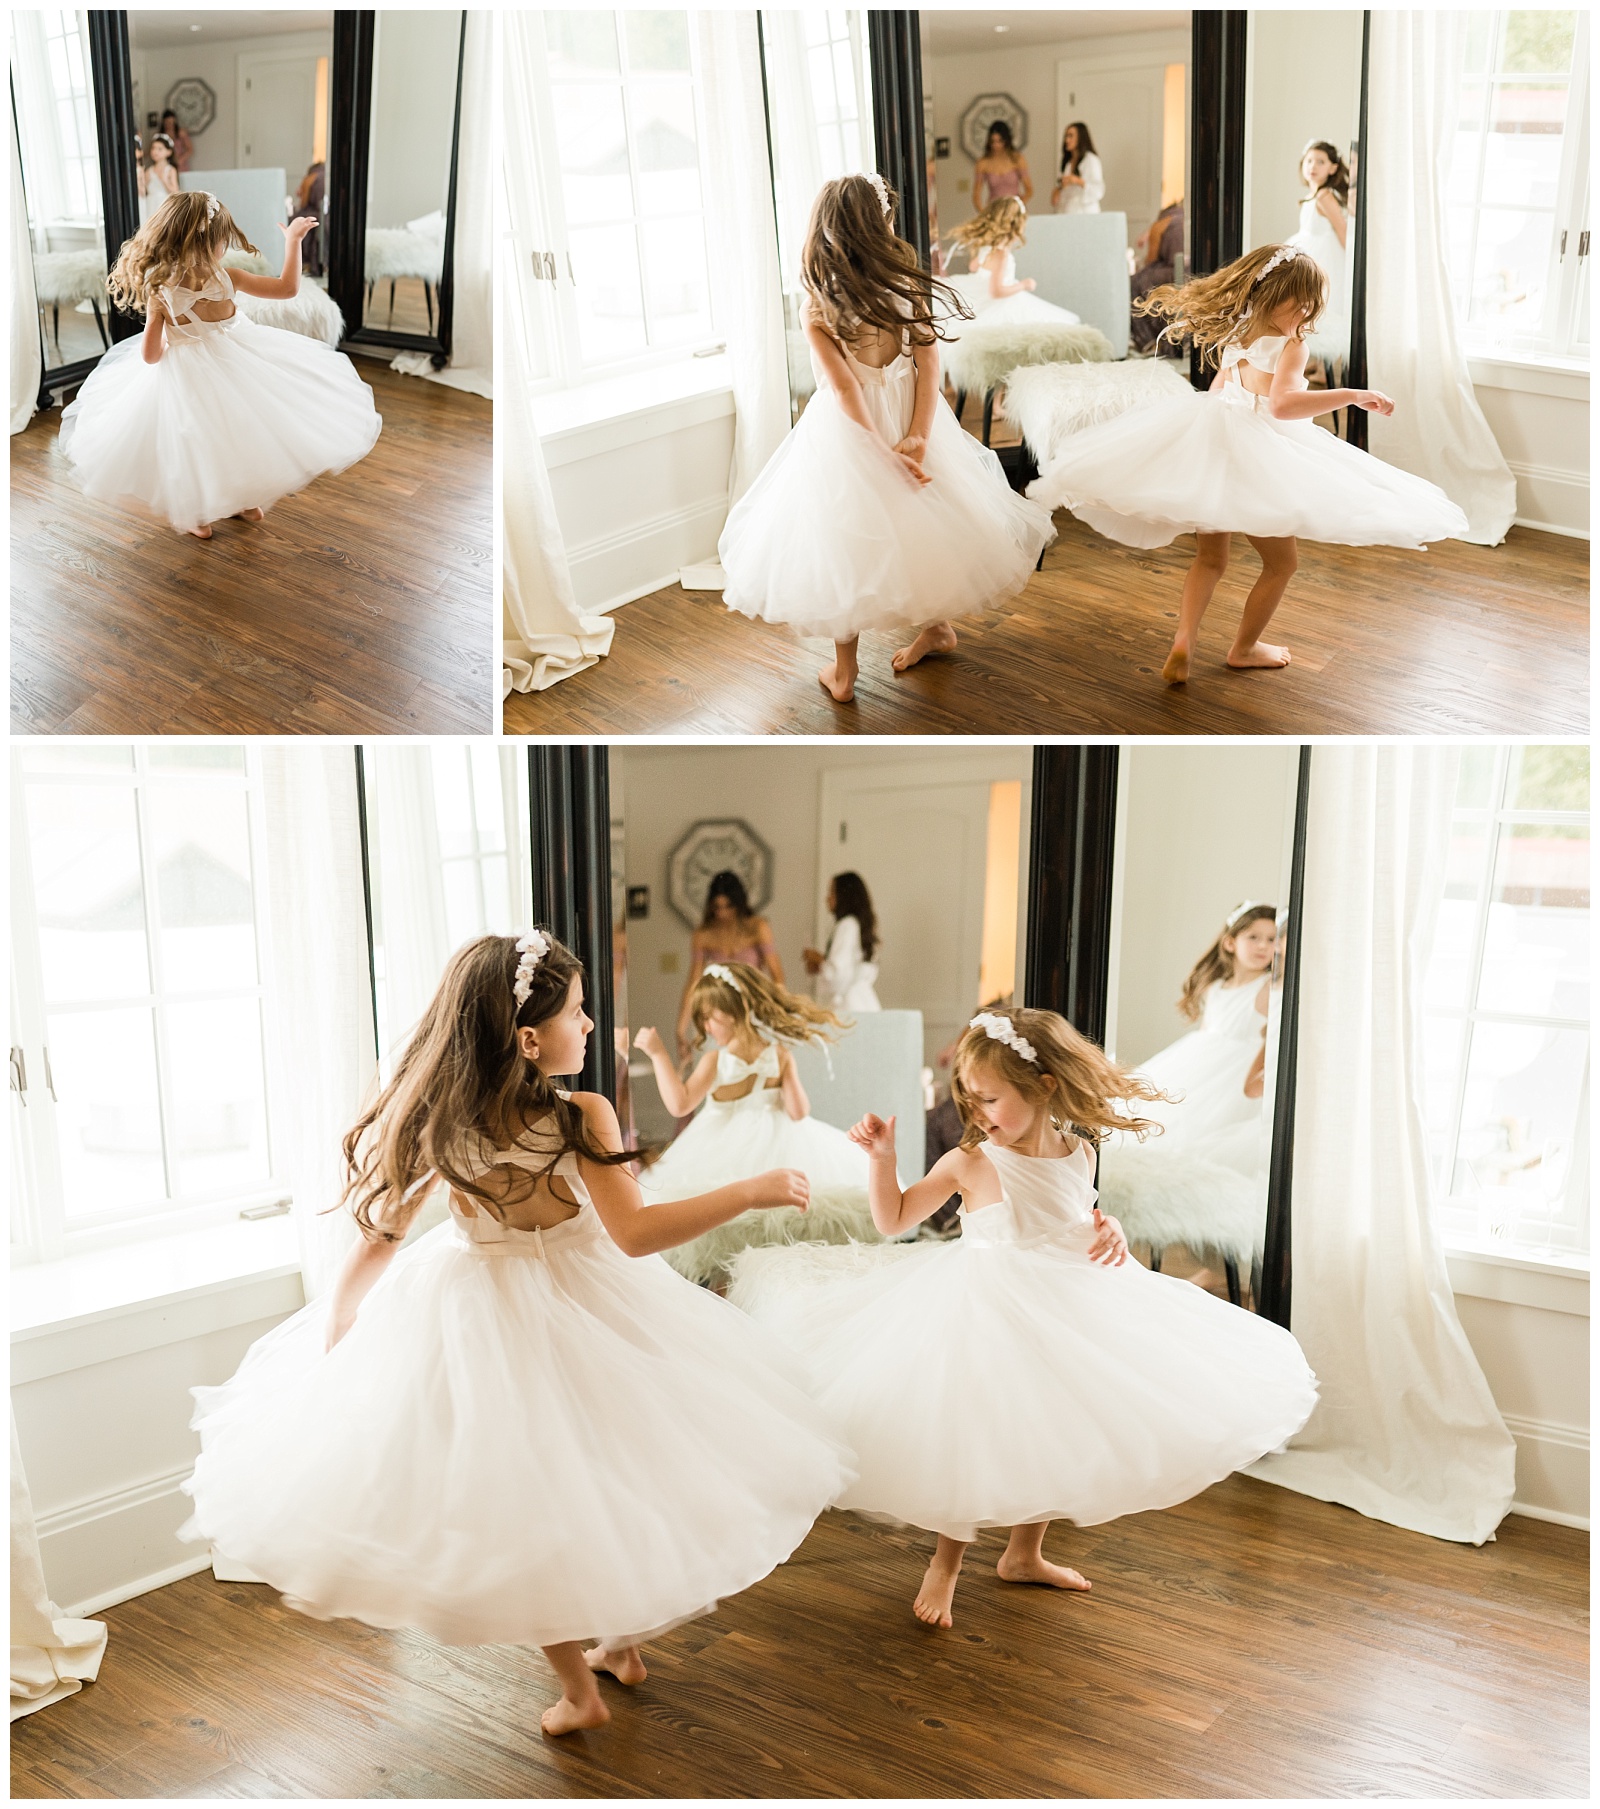 flower girls twirl in the mirror after putting on their tulle dresses. Photo taken by jenn eddine photography, a greensboro north carolina wedding photographer